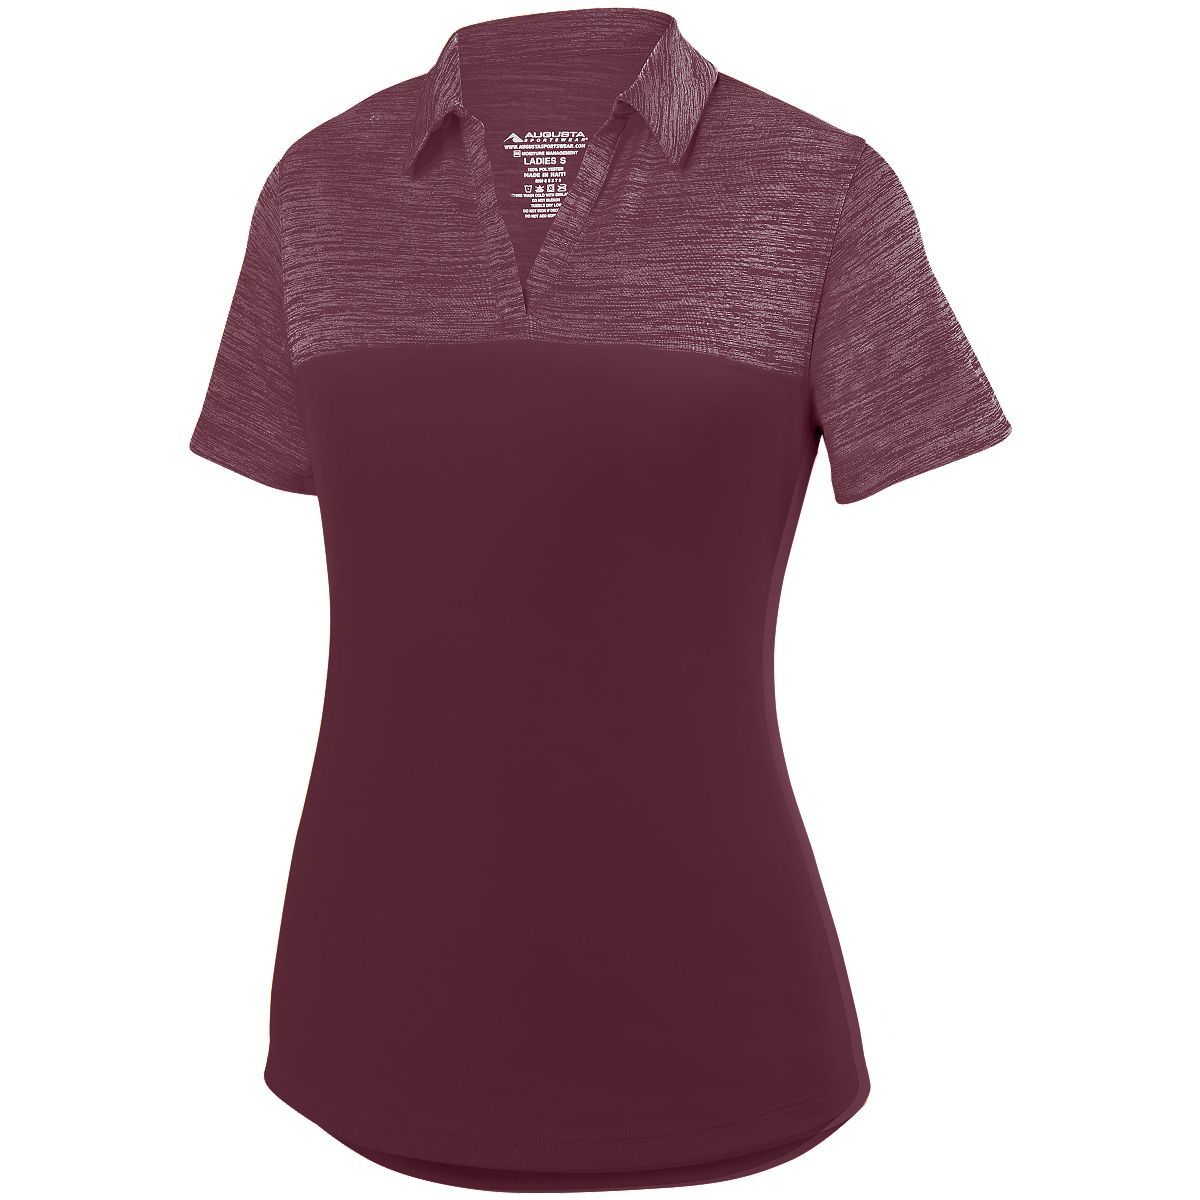 Augusta Sportswear Ladies Shadow Tonal Heather Polo in Maroon  -Part of the Ladies, Ladies-Polo, Polos, Augusta-Products, Shirts, Tonal-Fleece-Collection product lines at KanaleyCreations.com